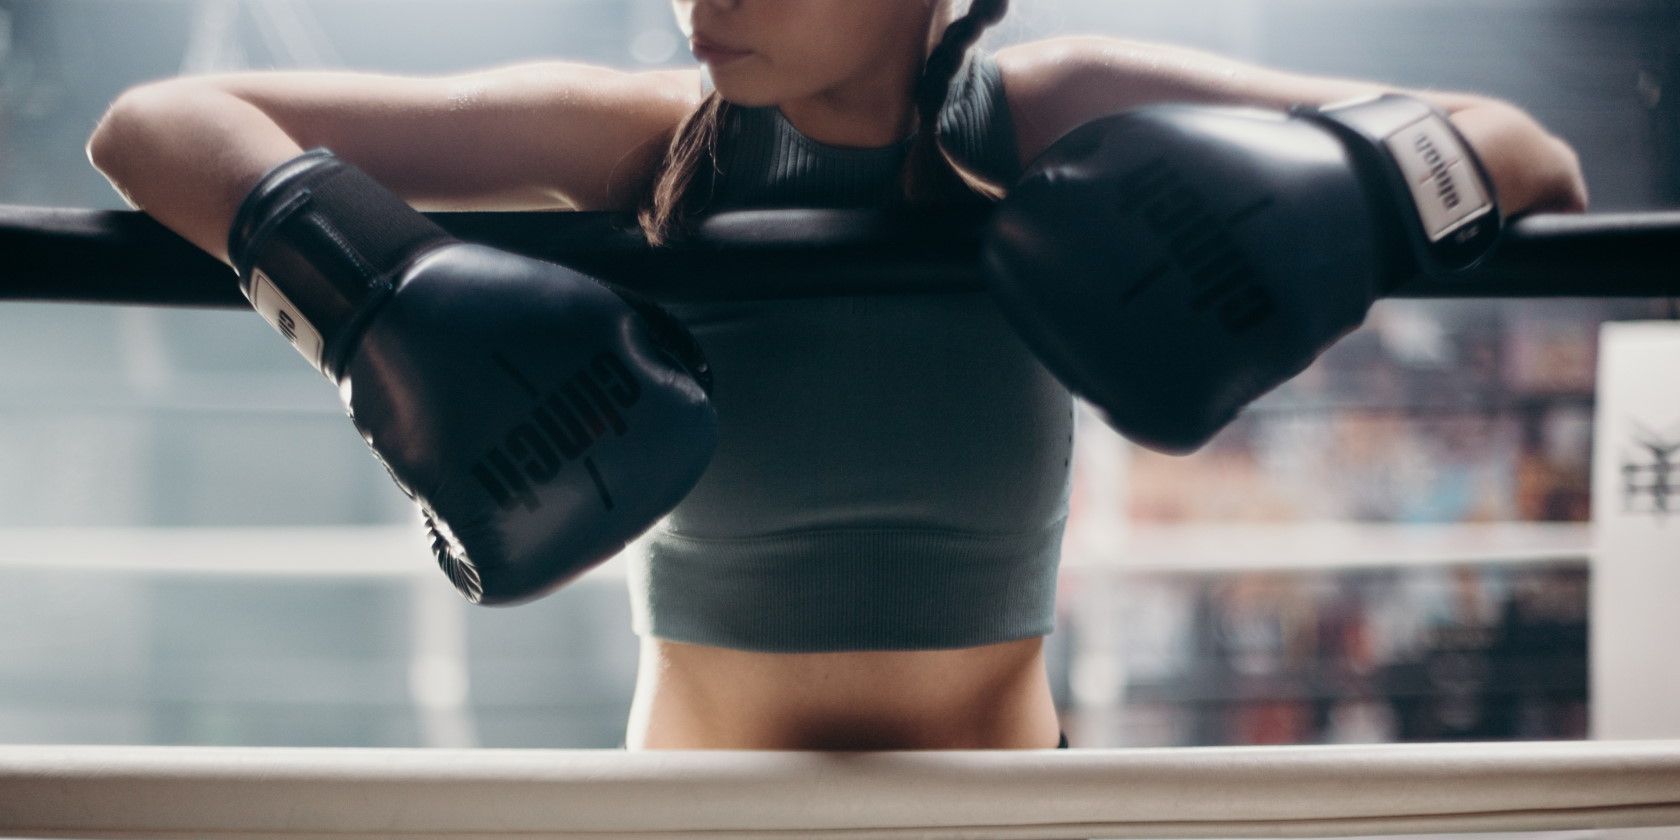 Channel Your Inner Rocky Balboa With 7 Fierce Boxing Programs